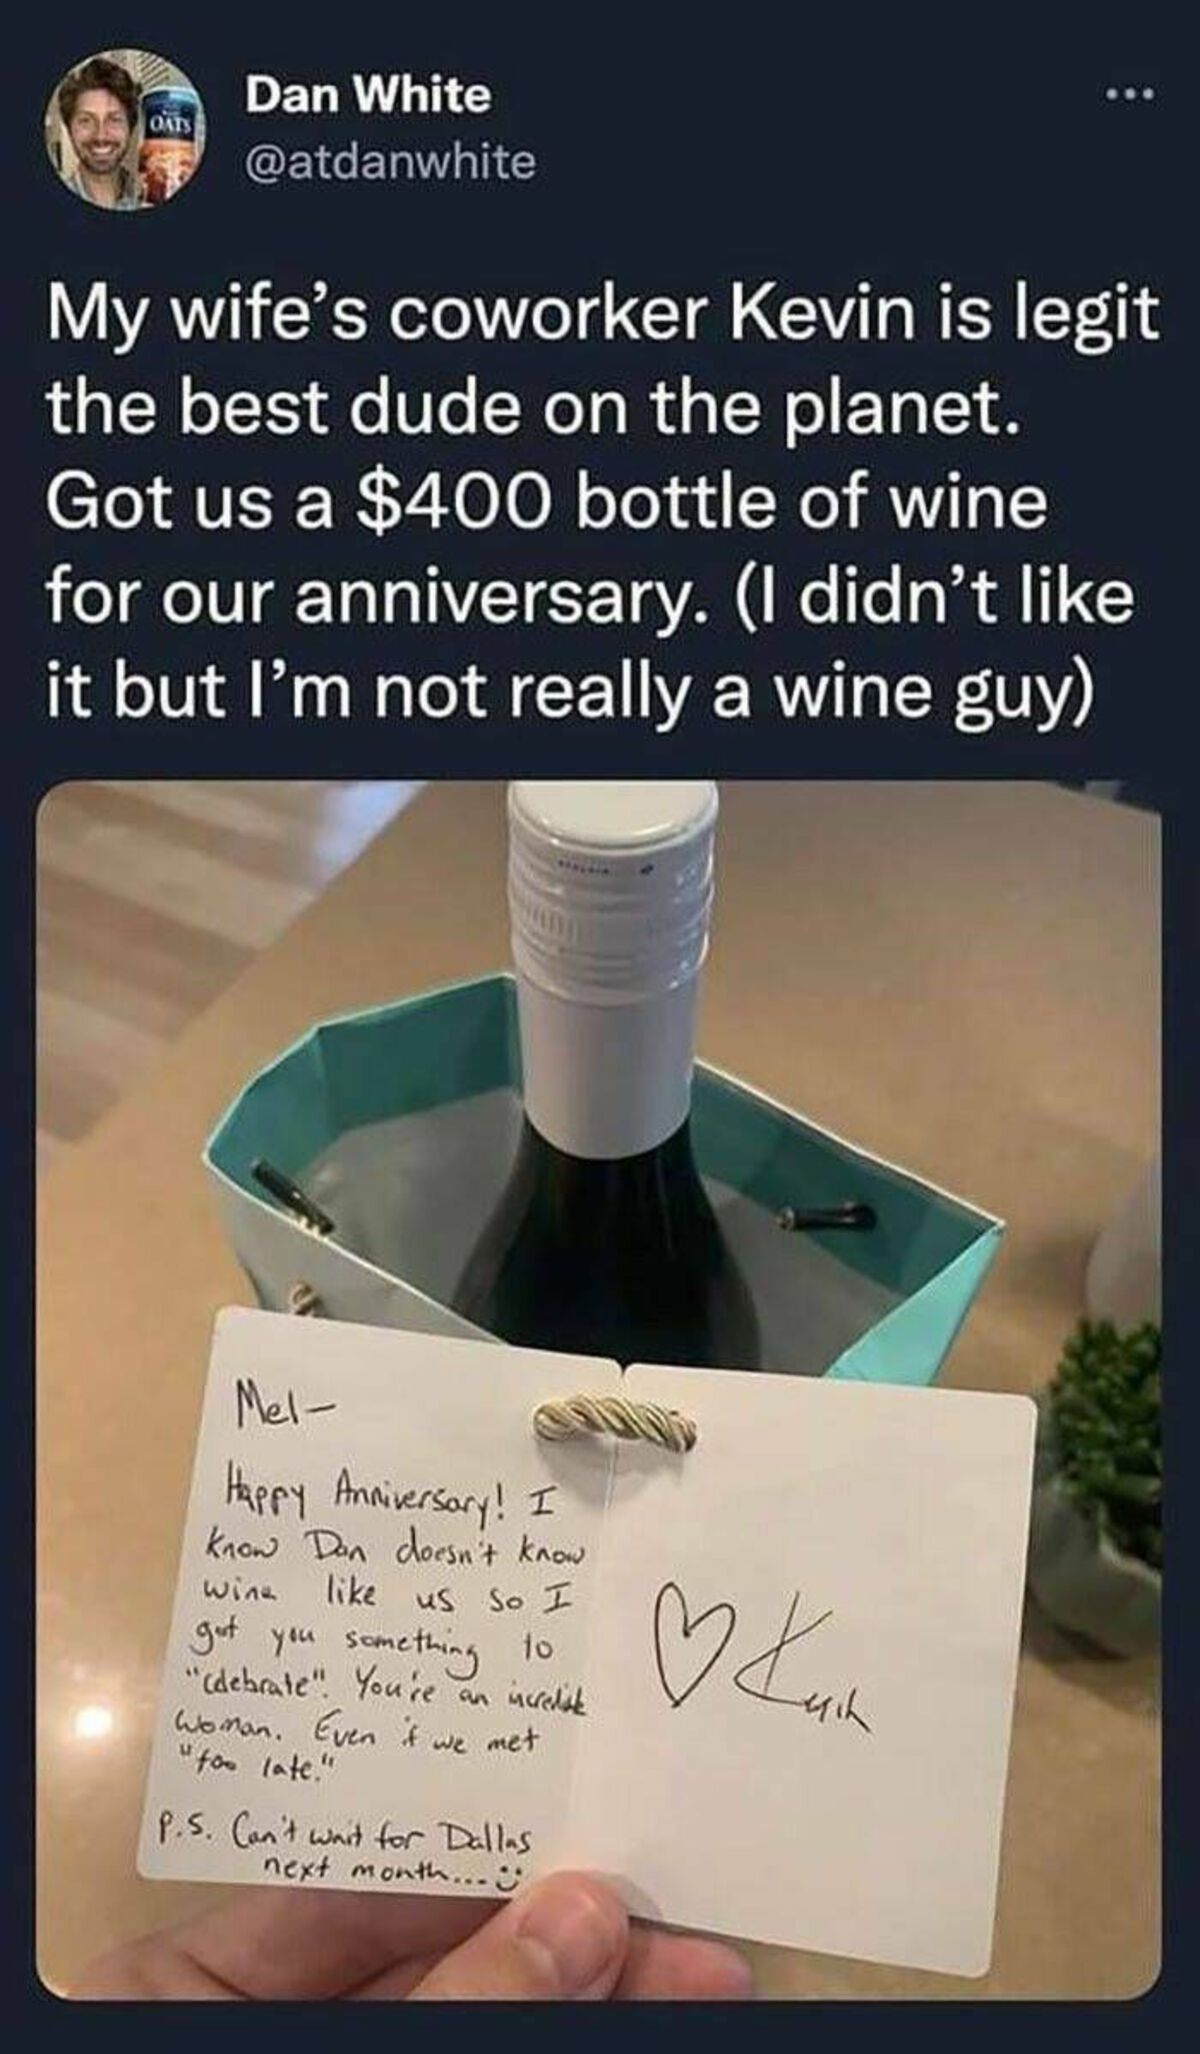 glass bottle - Oats Dan White My wife's coworker Kevin is legit the best dude on the planet. Got us a $400 bottle of wine for our anniversary. I didn't it but I'm not really a wine guy Mel Happy Anniversary! I know Don doesn't know. wine us so I got you s